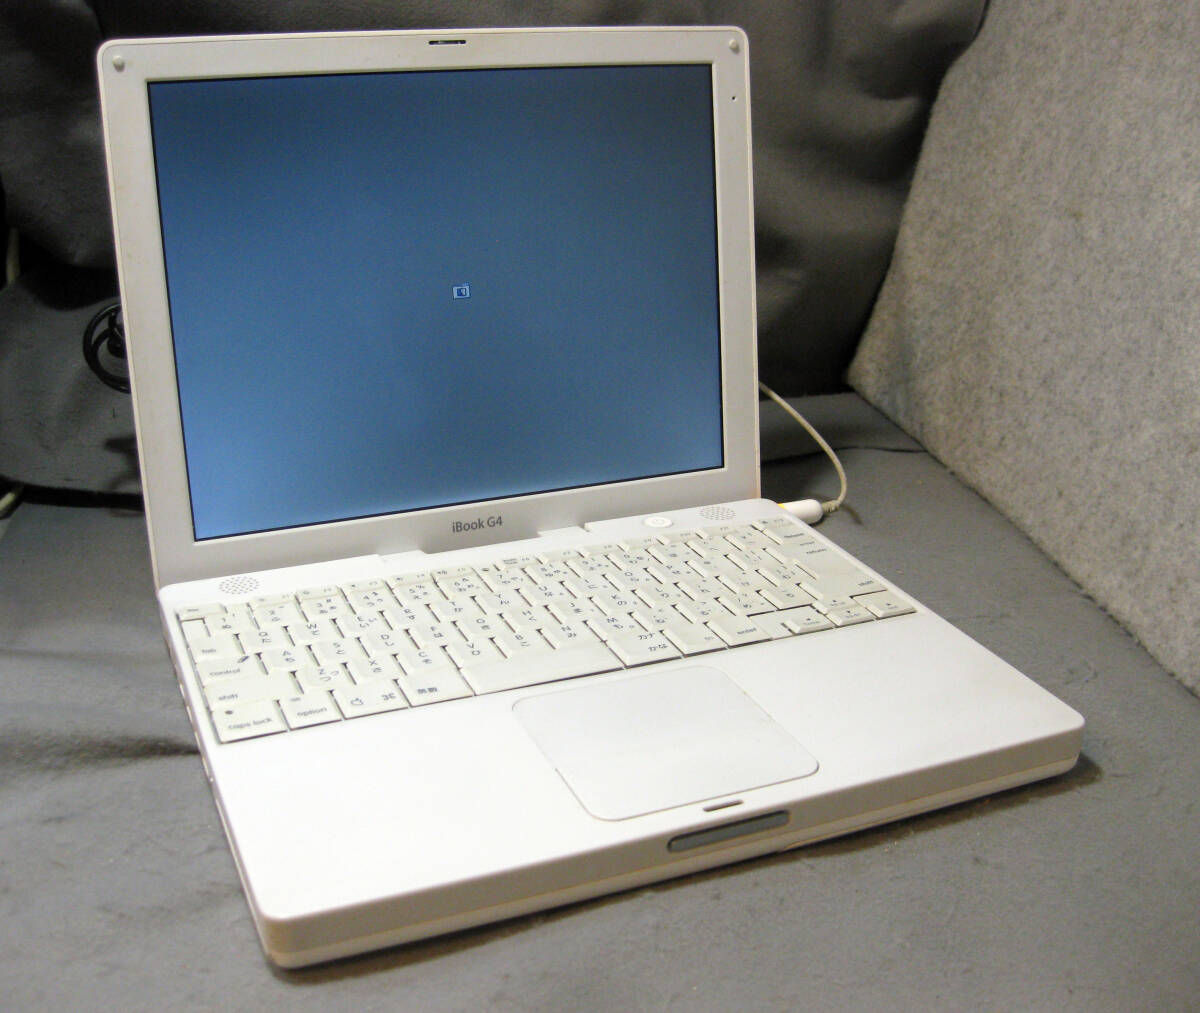 mb712 ibook G4 A1054 12 -inch 800Mhz Junk HDD verification ...